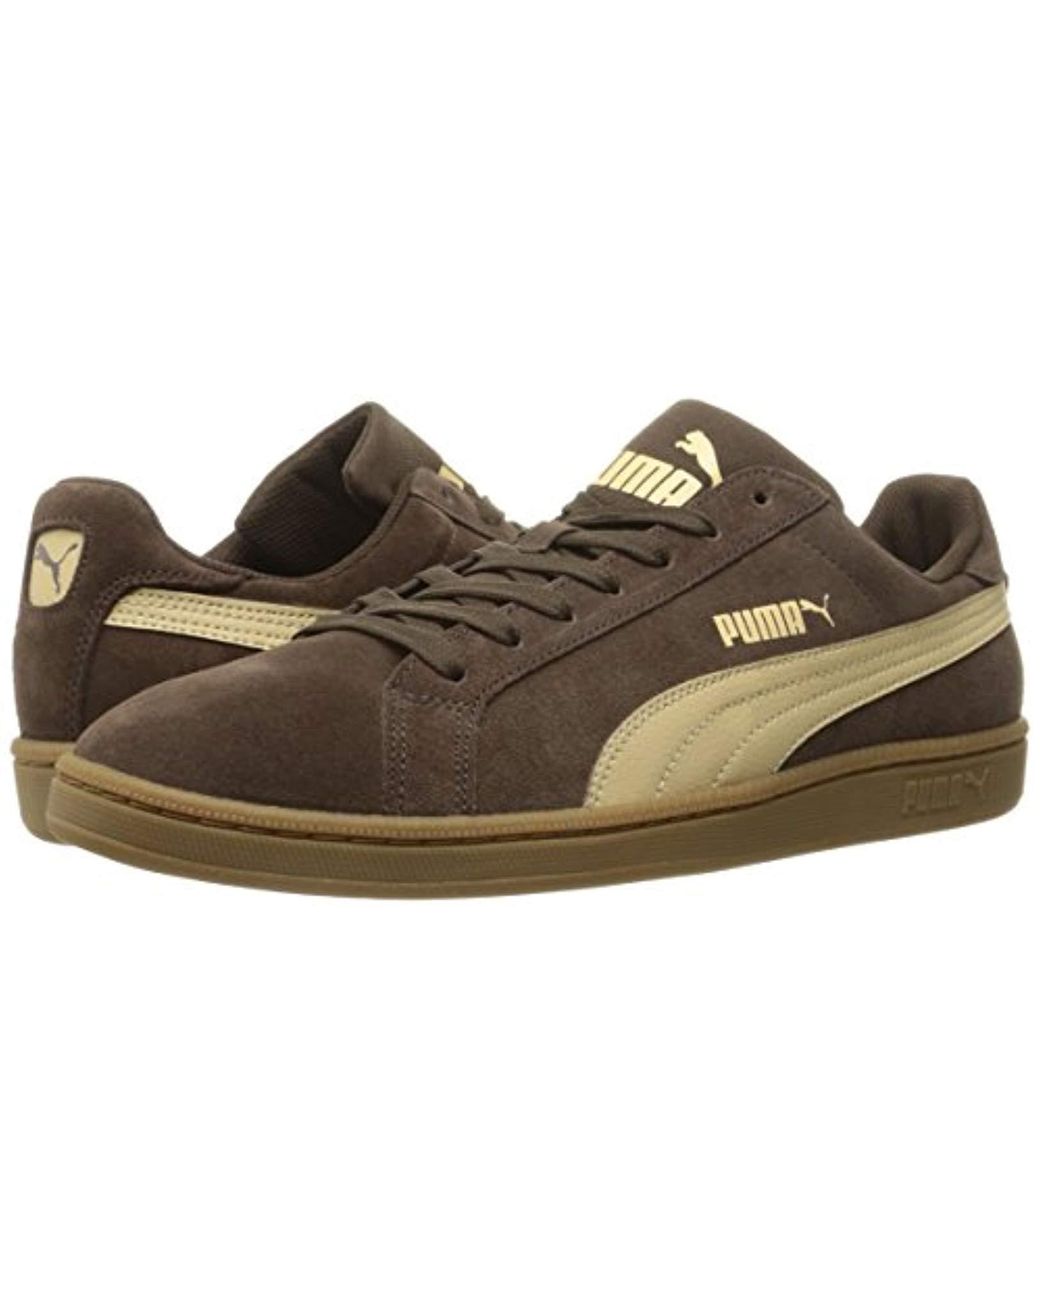 PUMA Suede Smash Sd Fashion Sneaker in Chocolate Brown (Brown) for Men |  Lyst